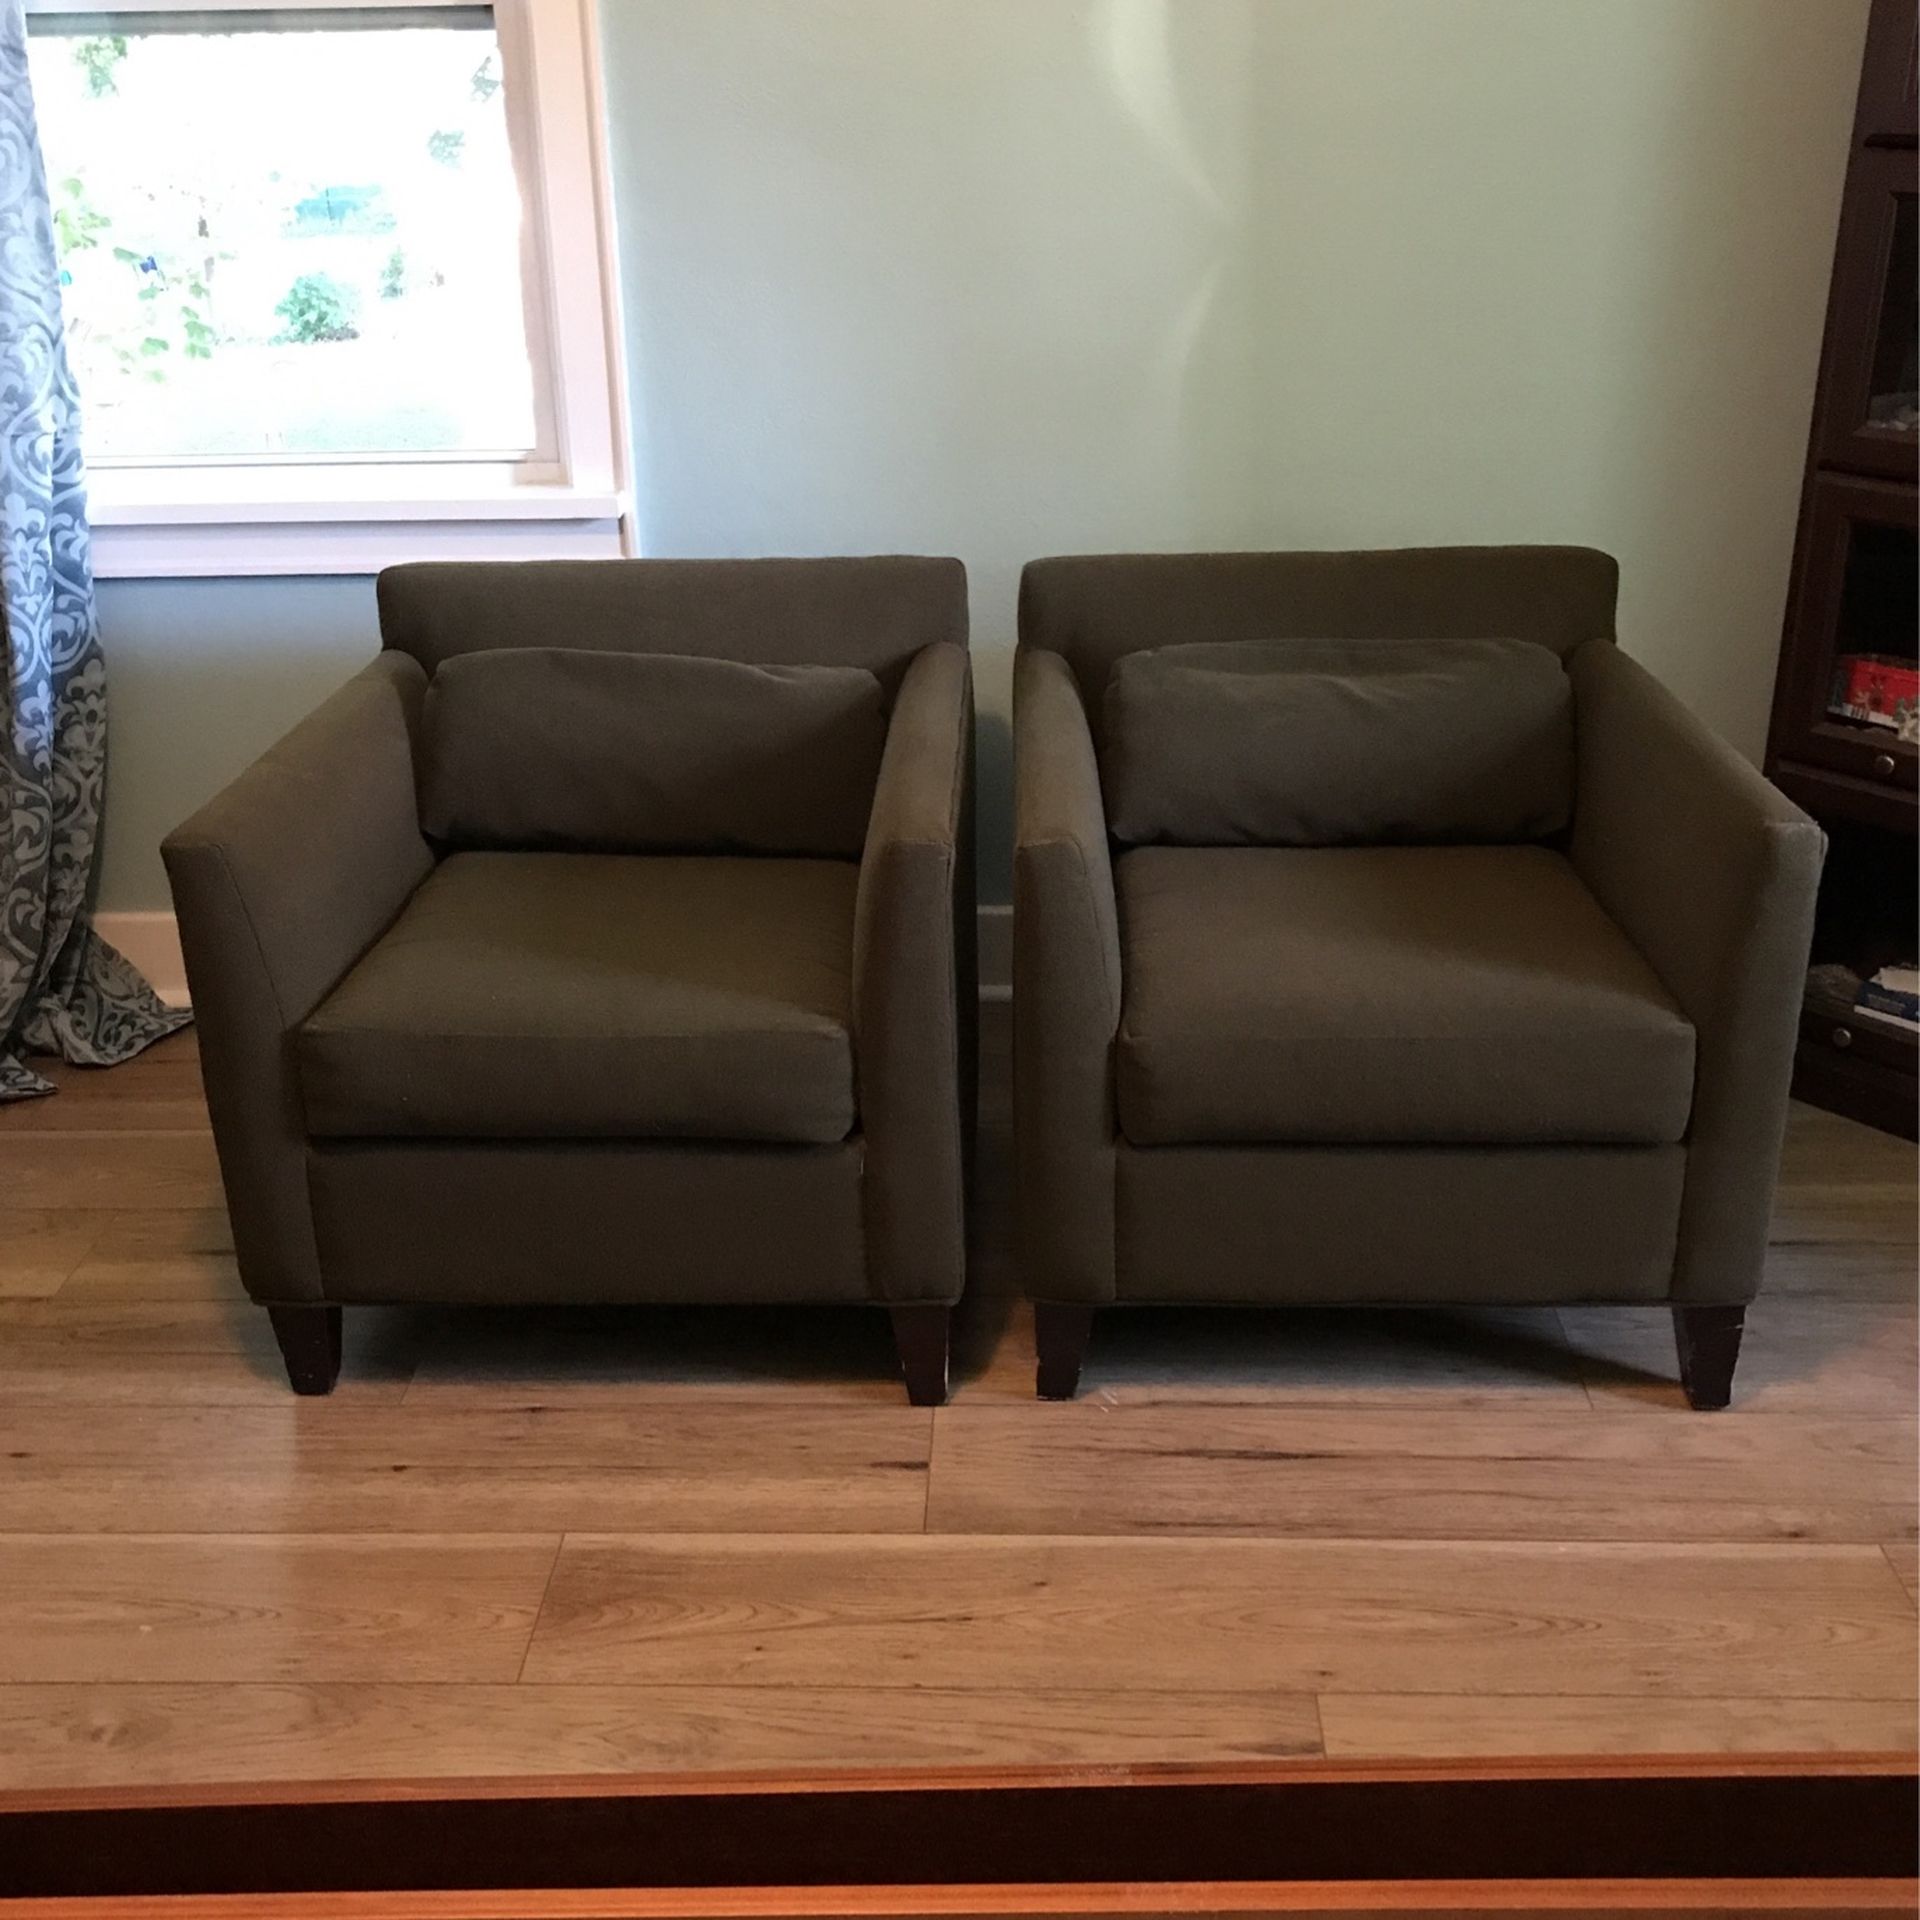 2 Comfortable Green Chairs